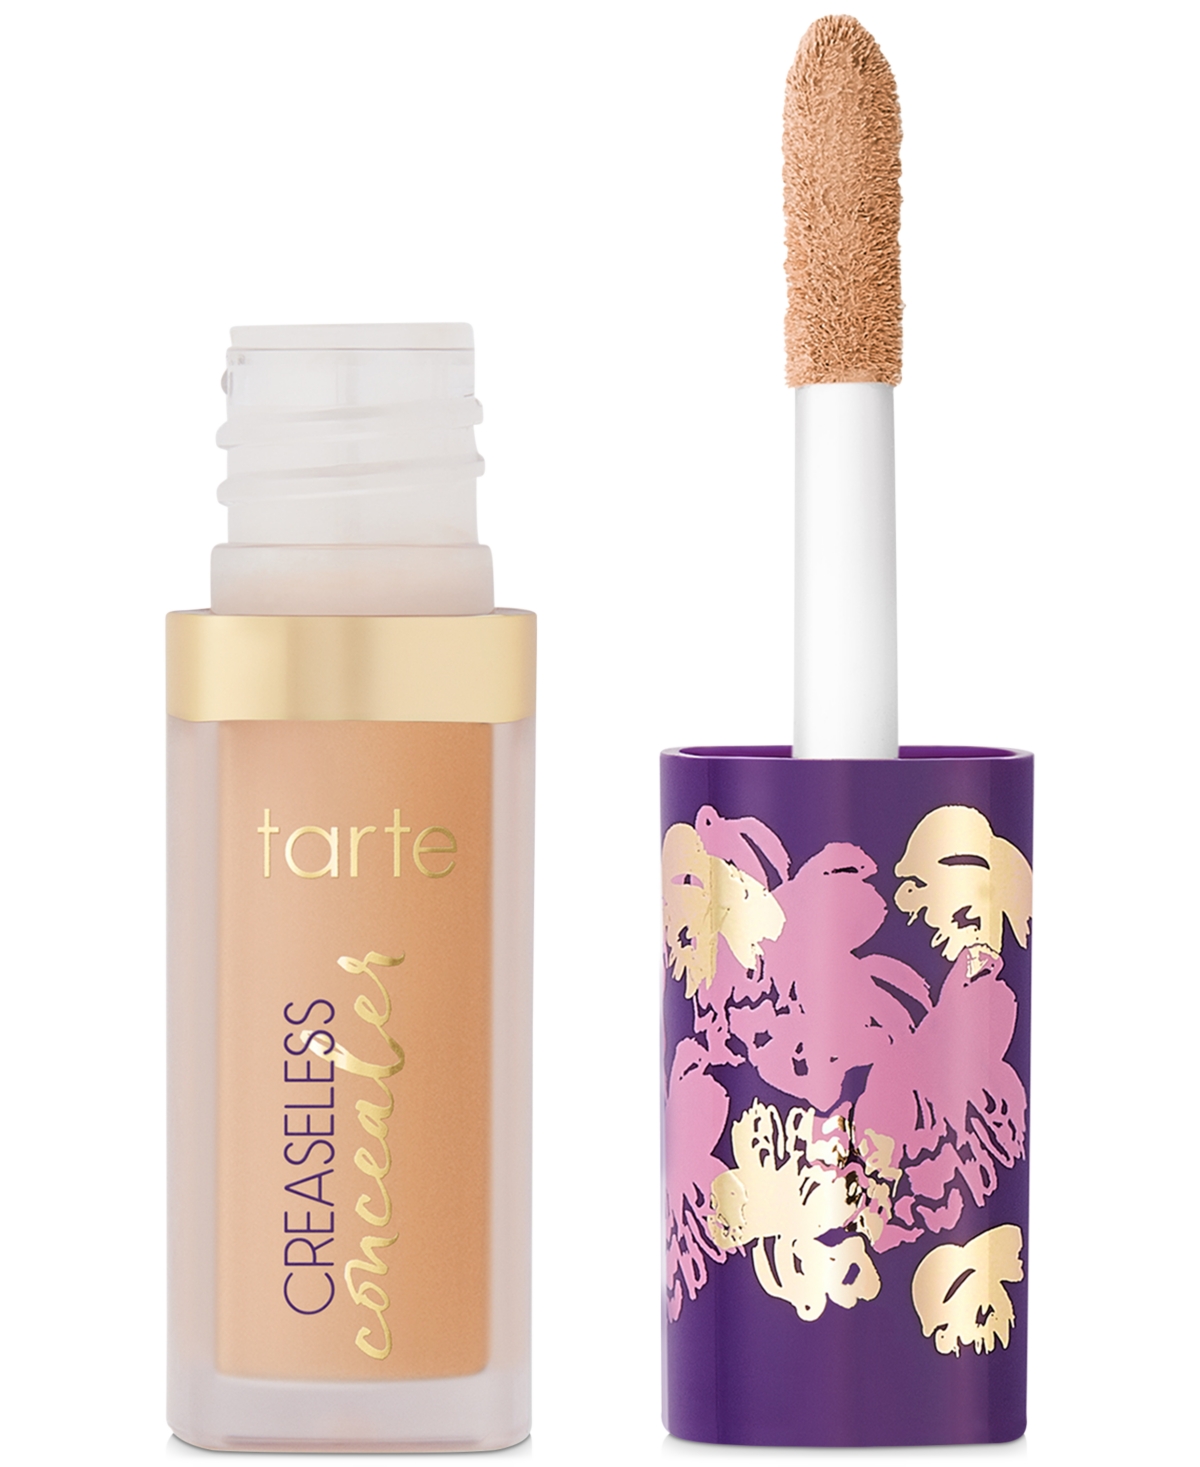 Creaseless Concealer, Travel Size - N Mahogany - deepest skin with neutral u